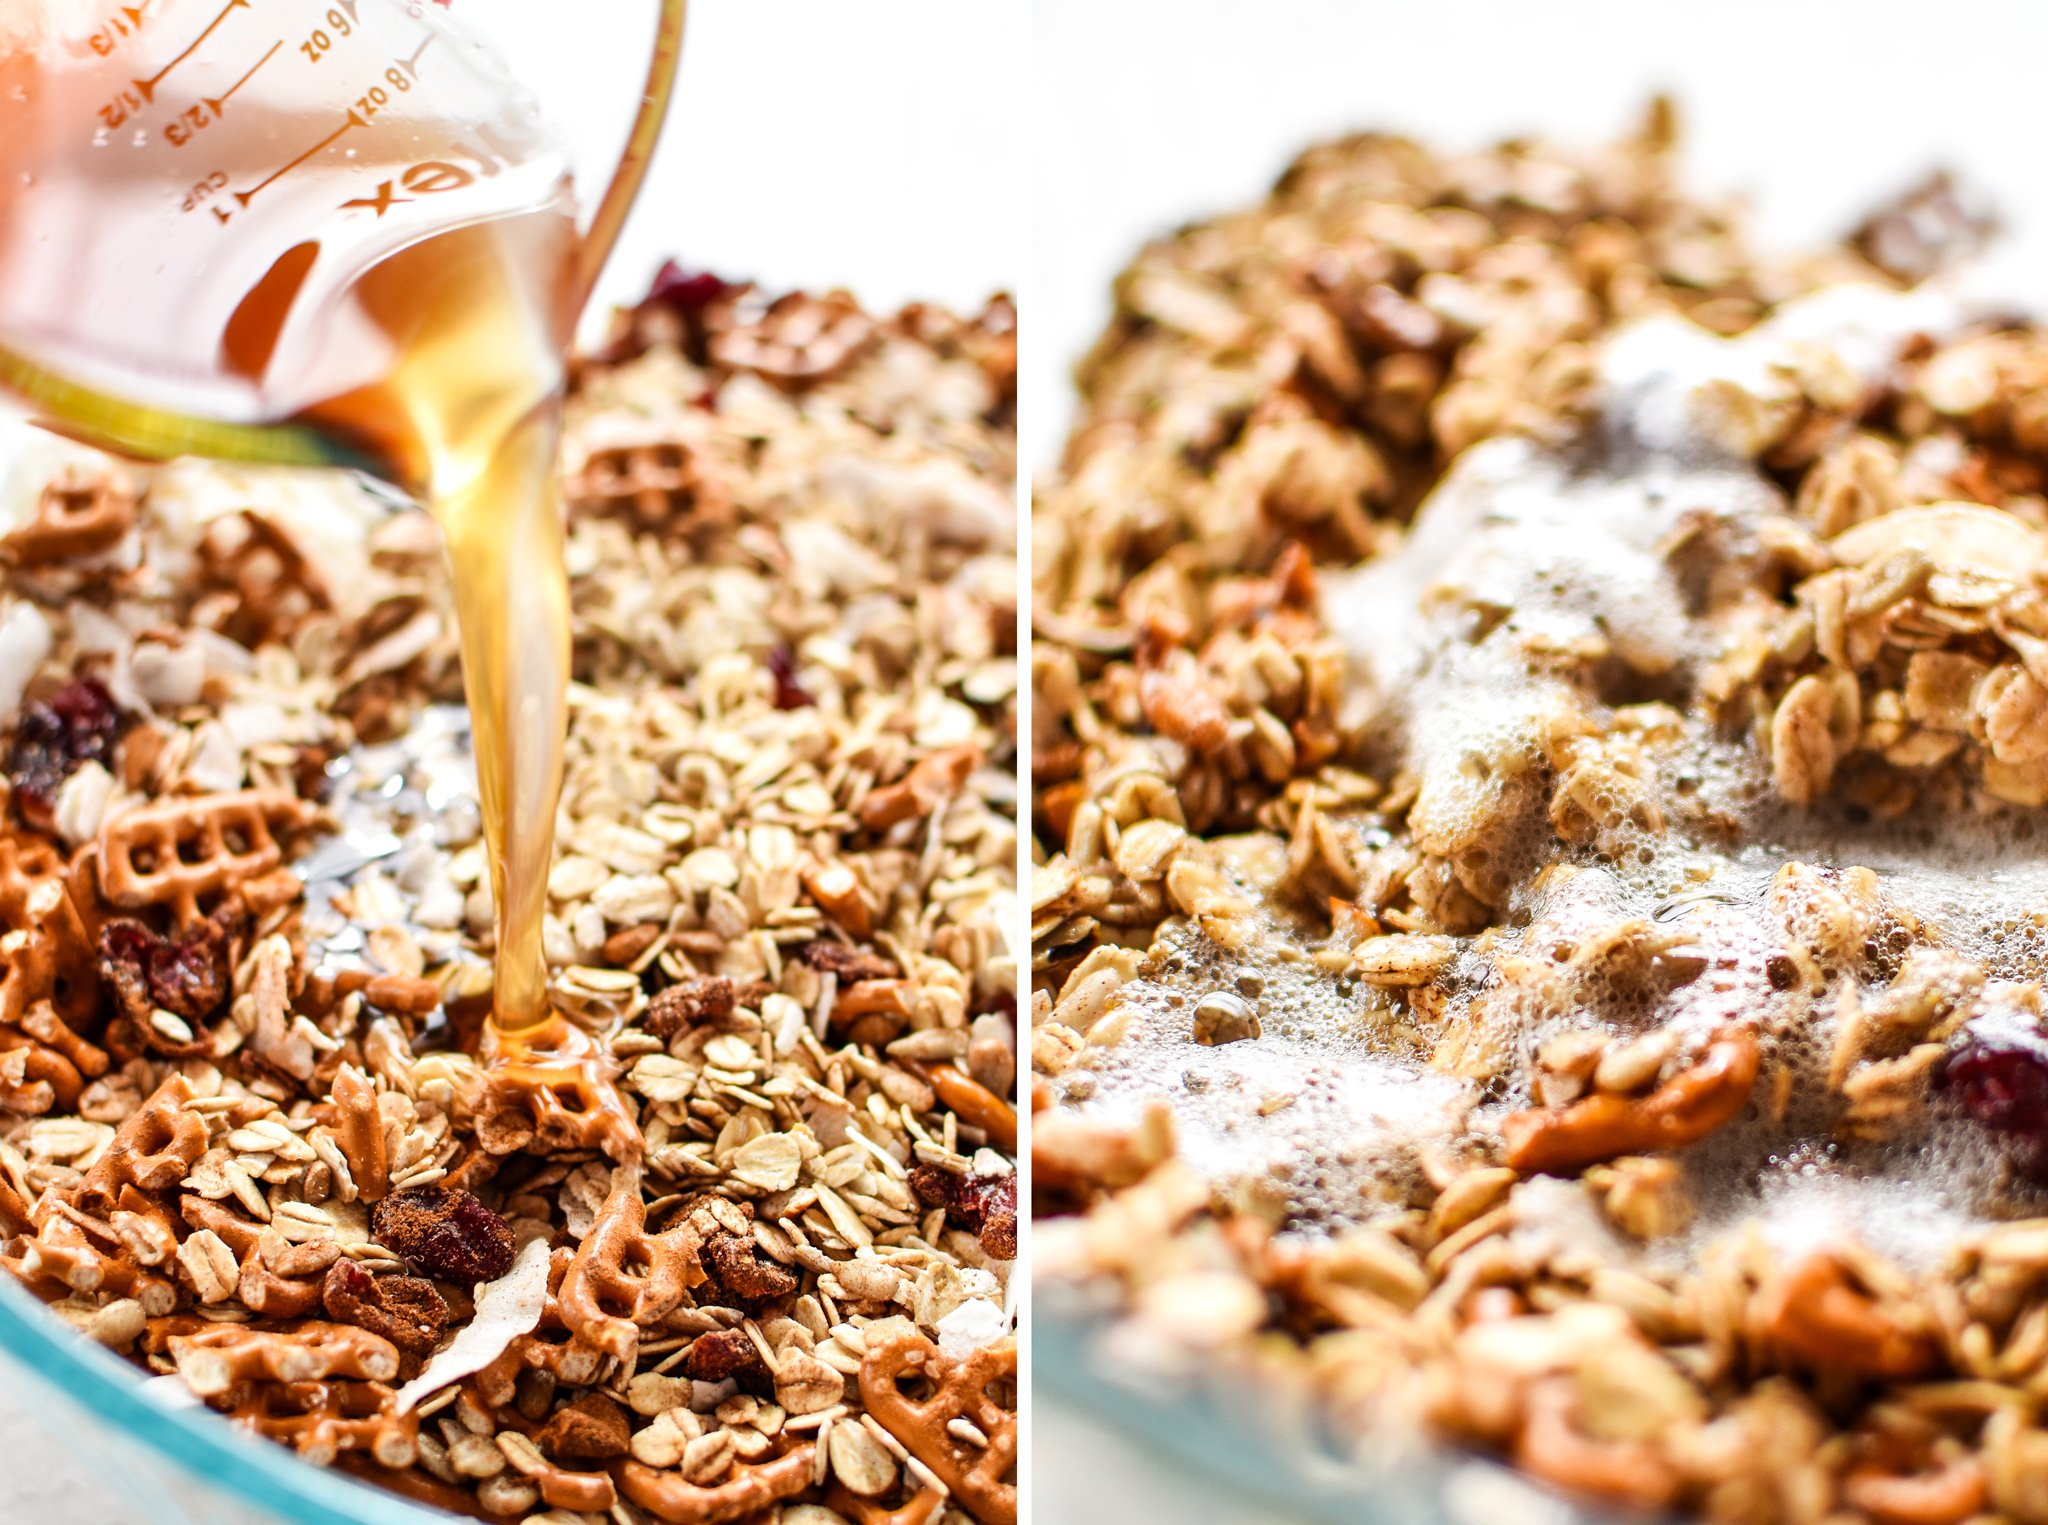 Pouring ingredients into the bowl of granola mixture.